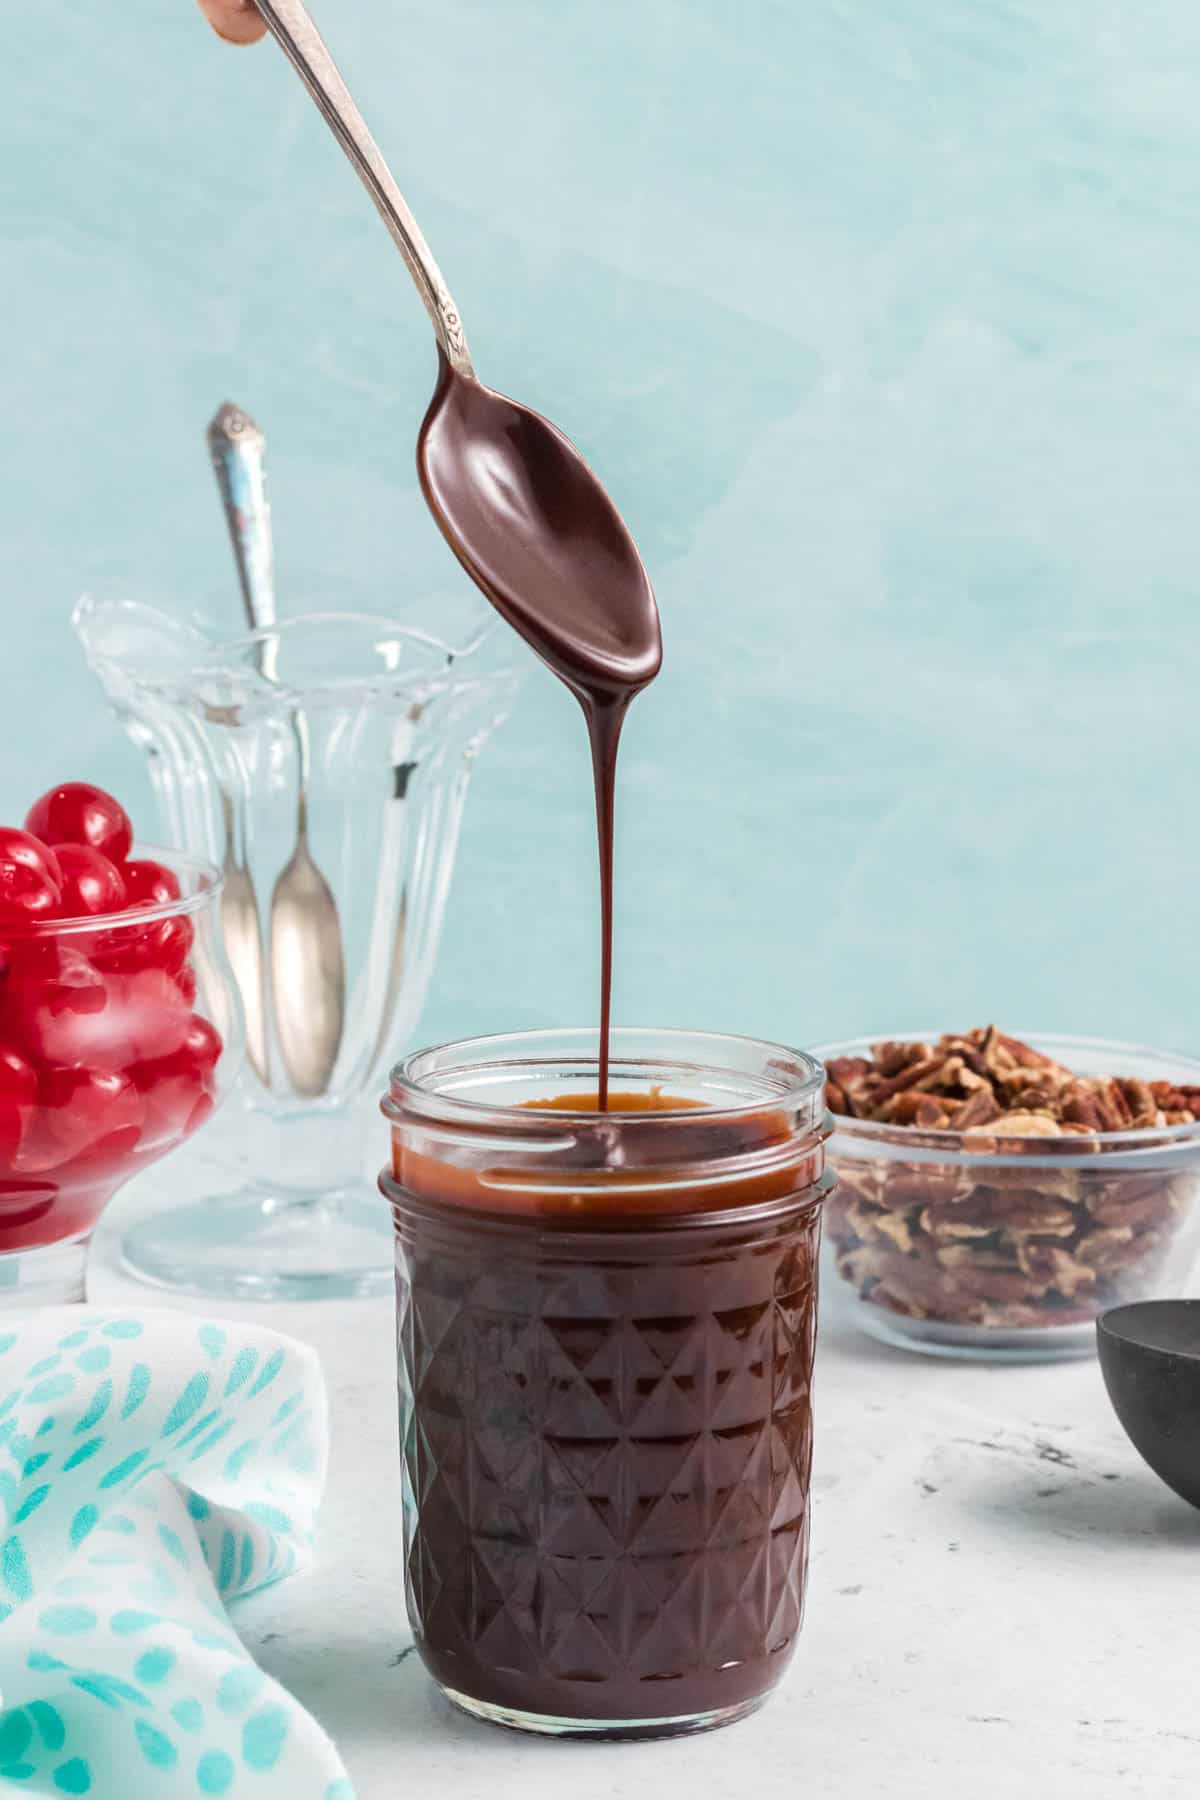 A spoon lifted over a jar of homemade hot fudge.